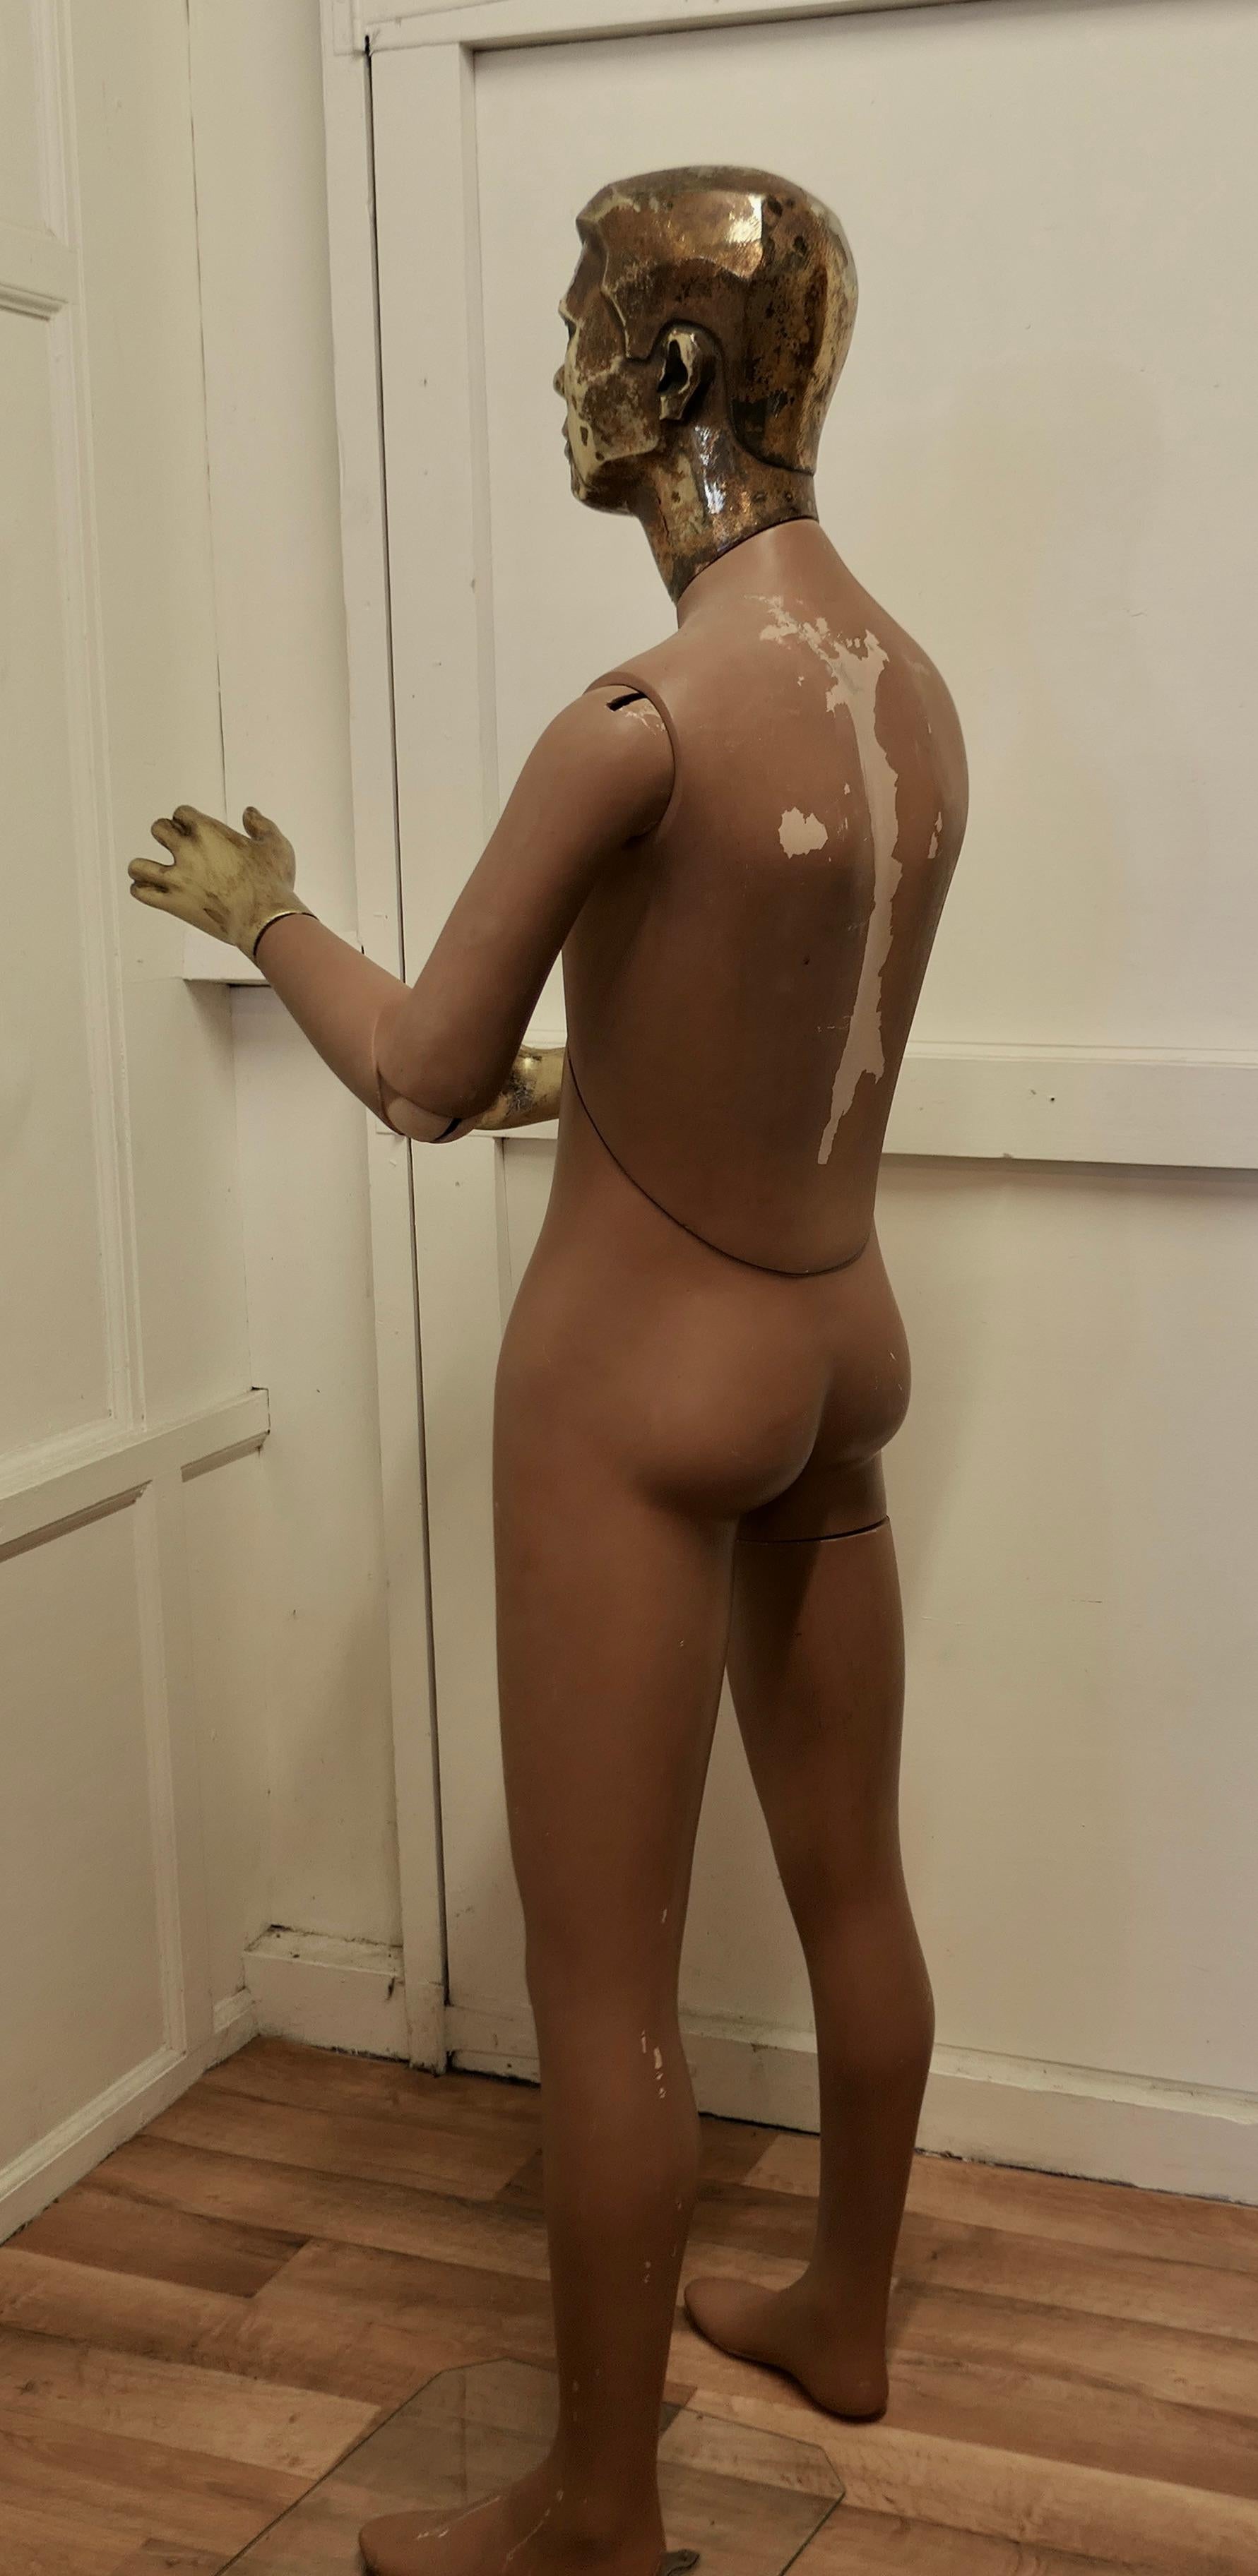 Quirky Offbeat Vintage Male Shop Mannequin For Sale 5